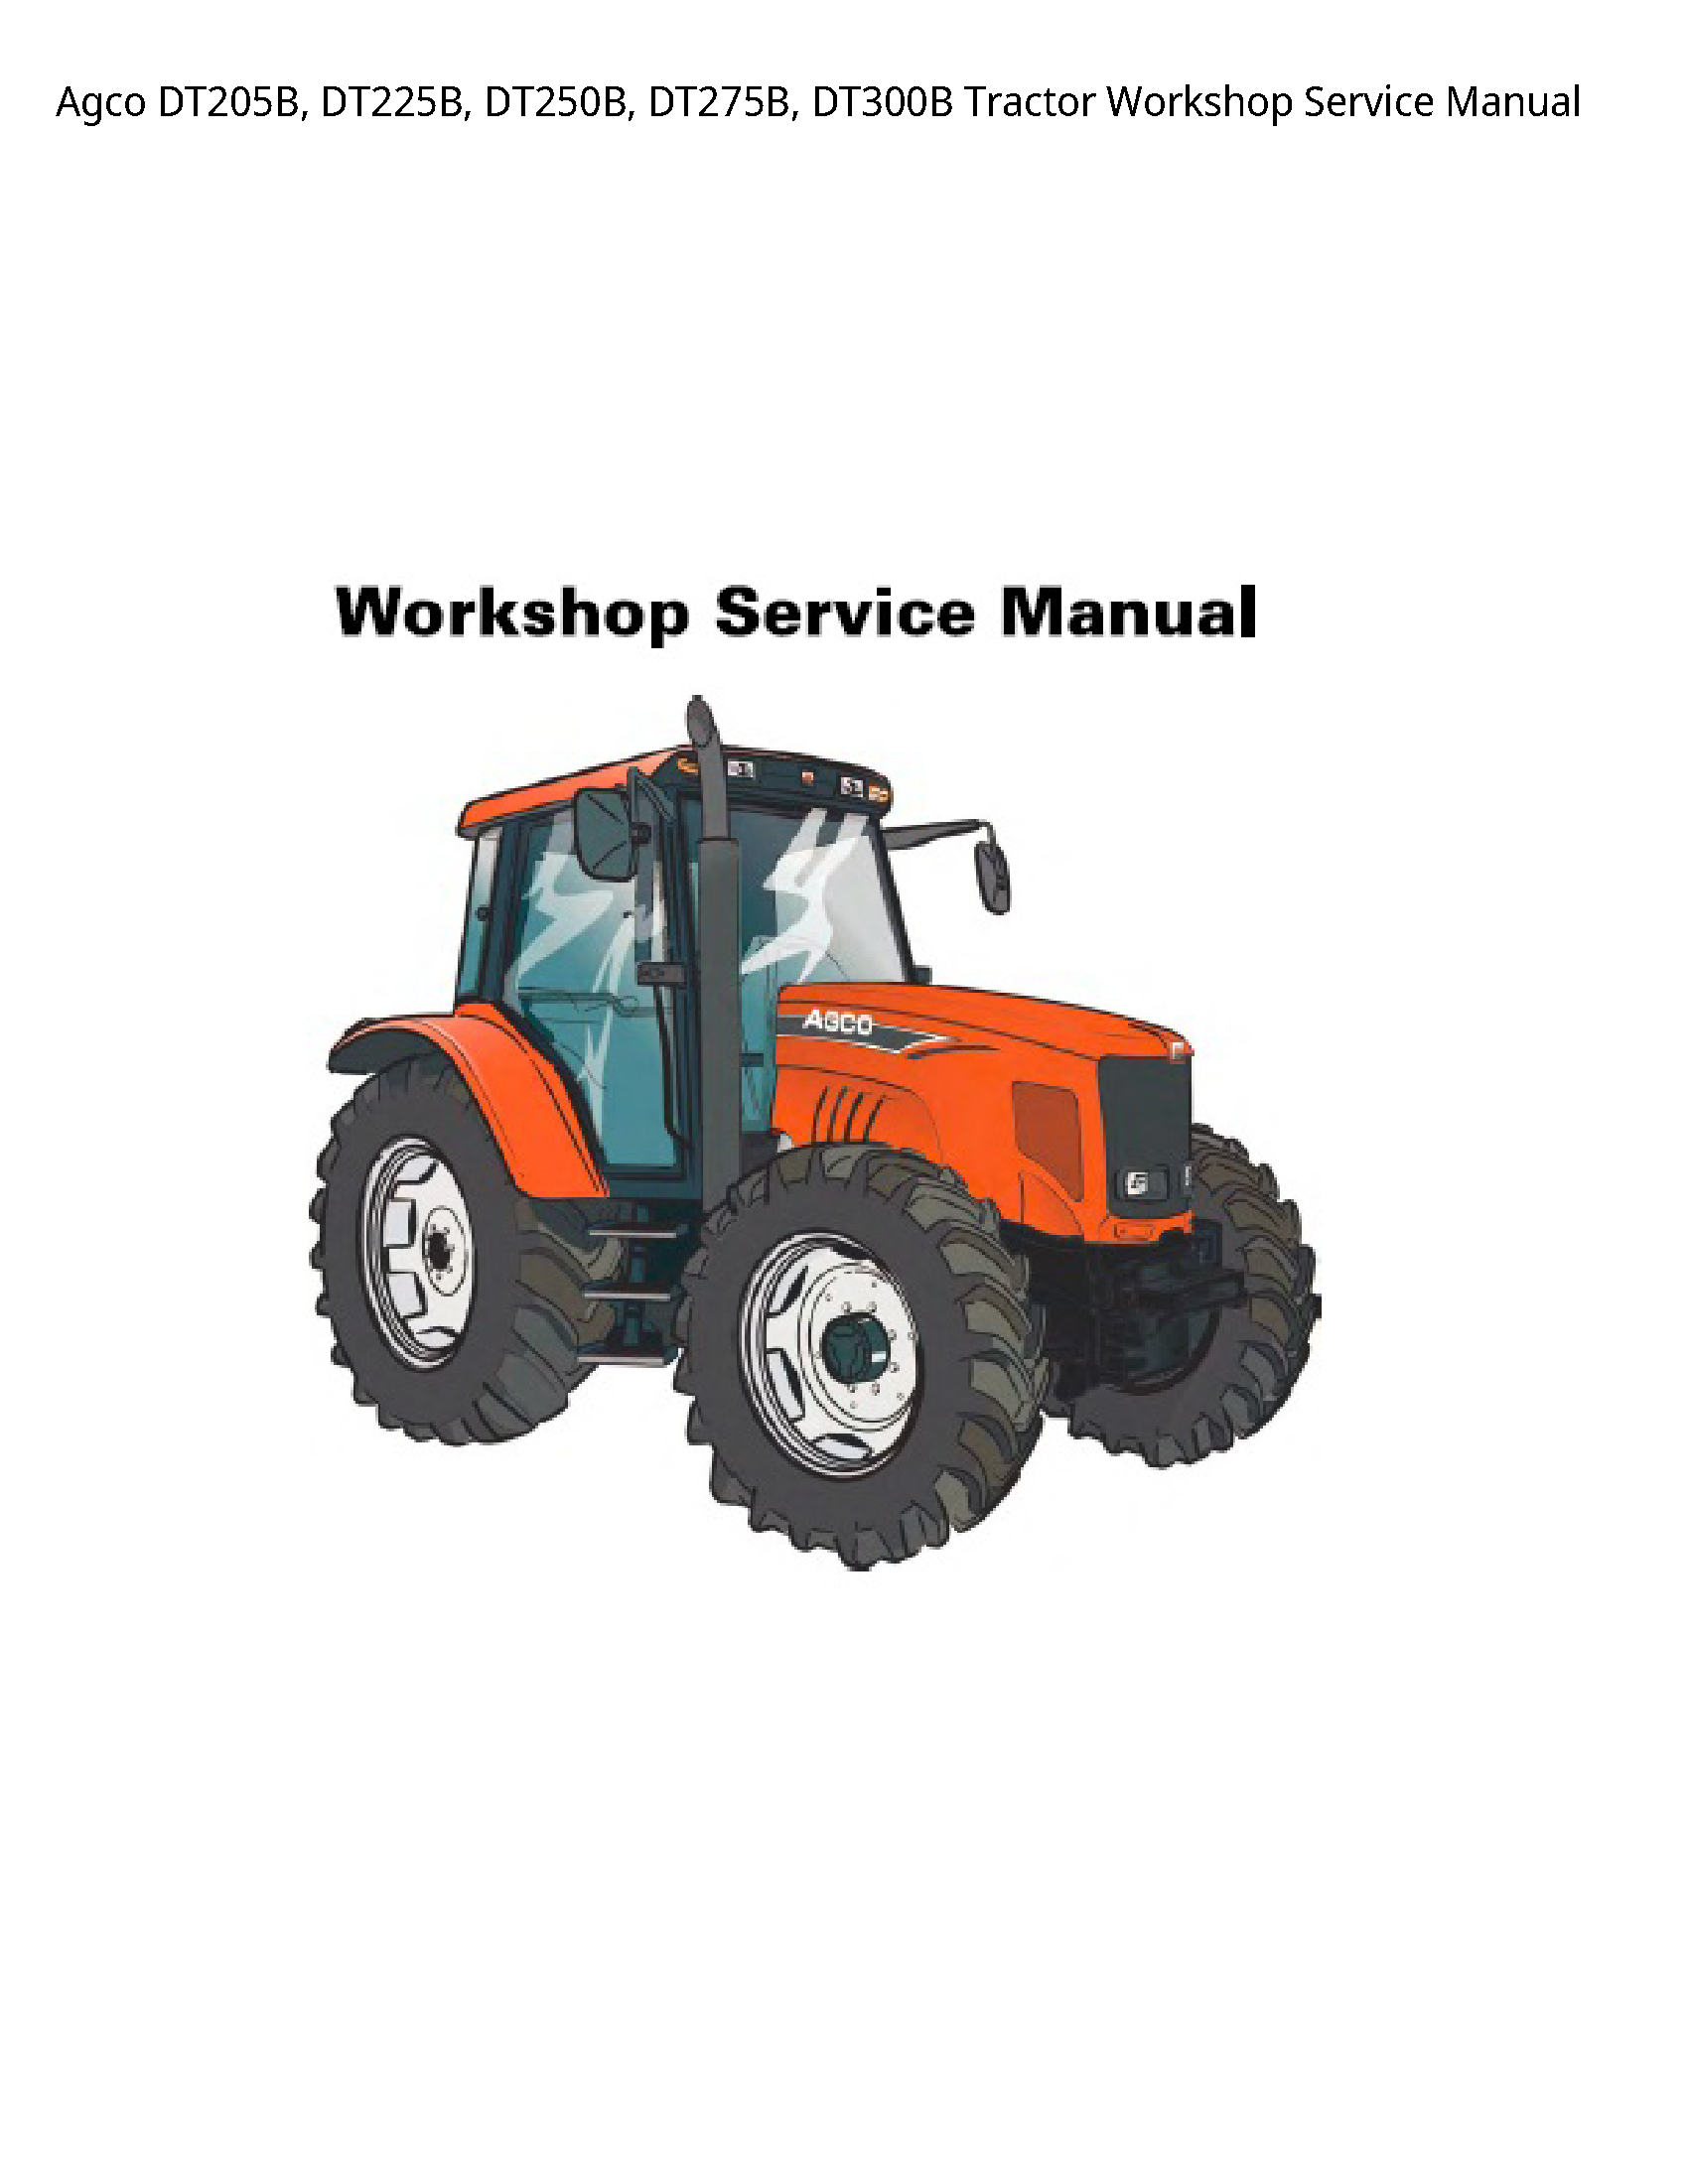 AGCO DT205B Tractor Service manual